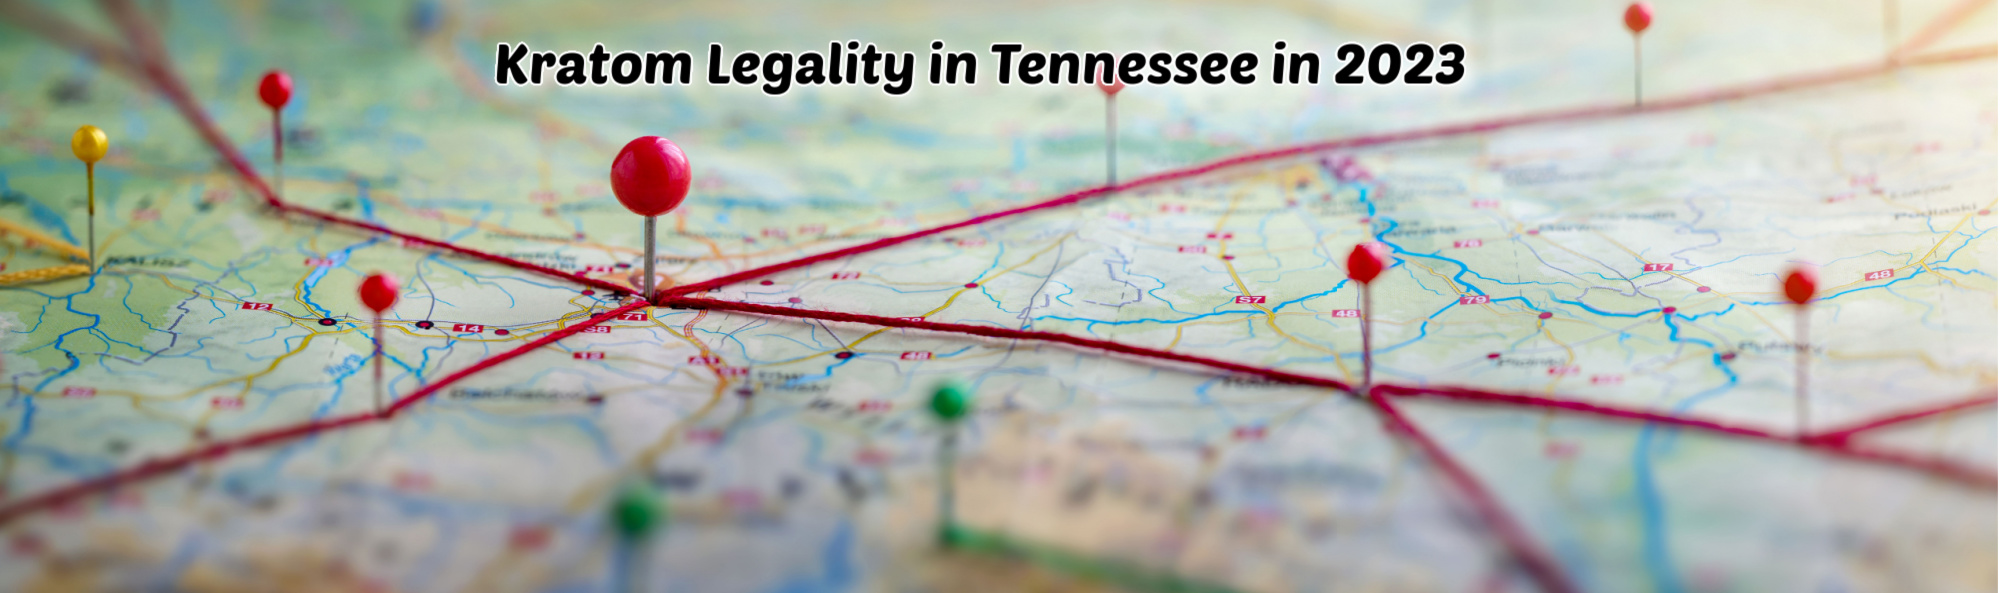 image of kratom legality in tennessee in 2023